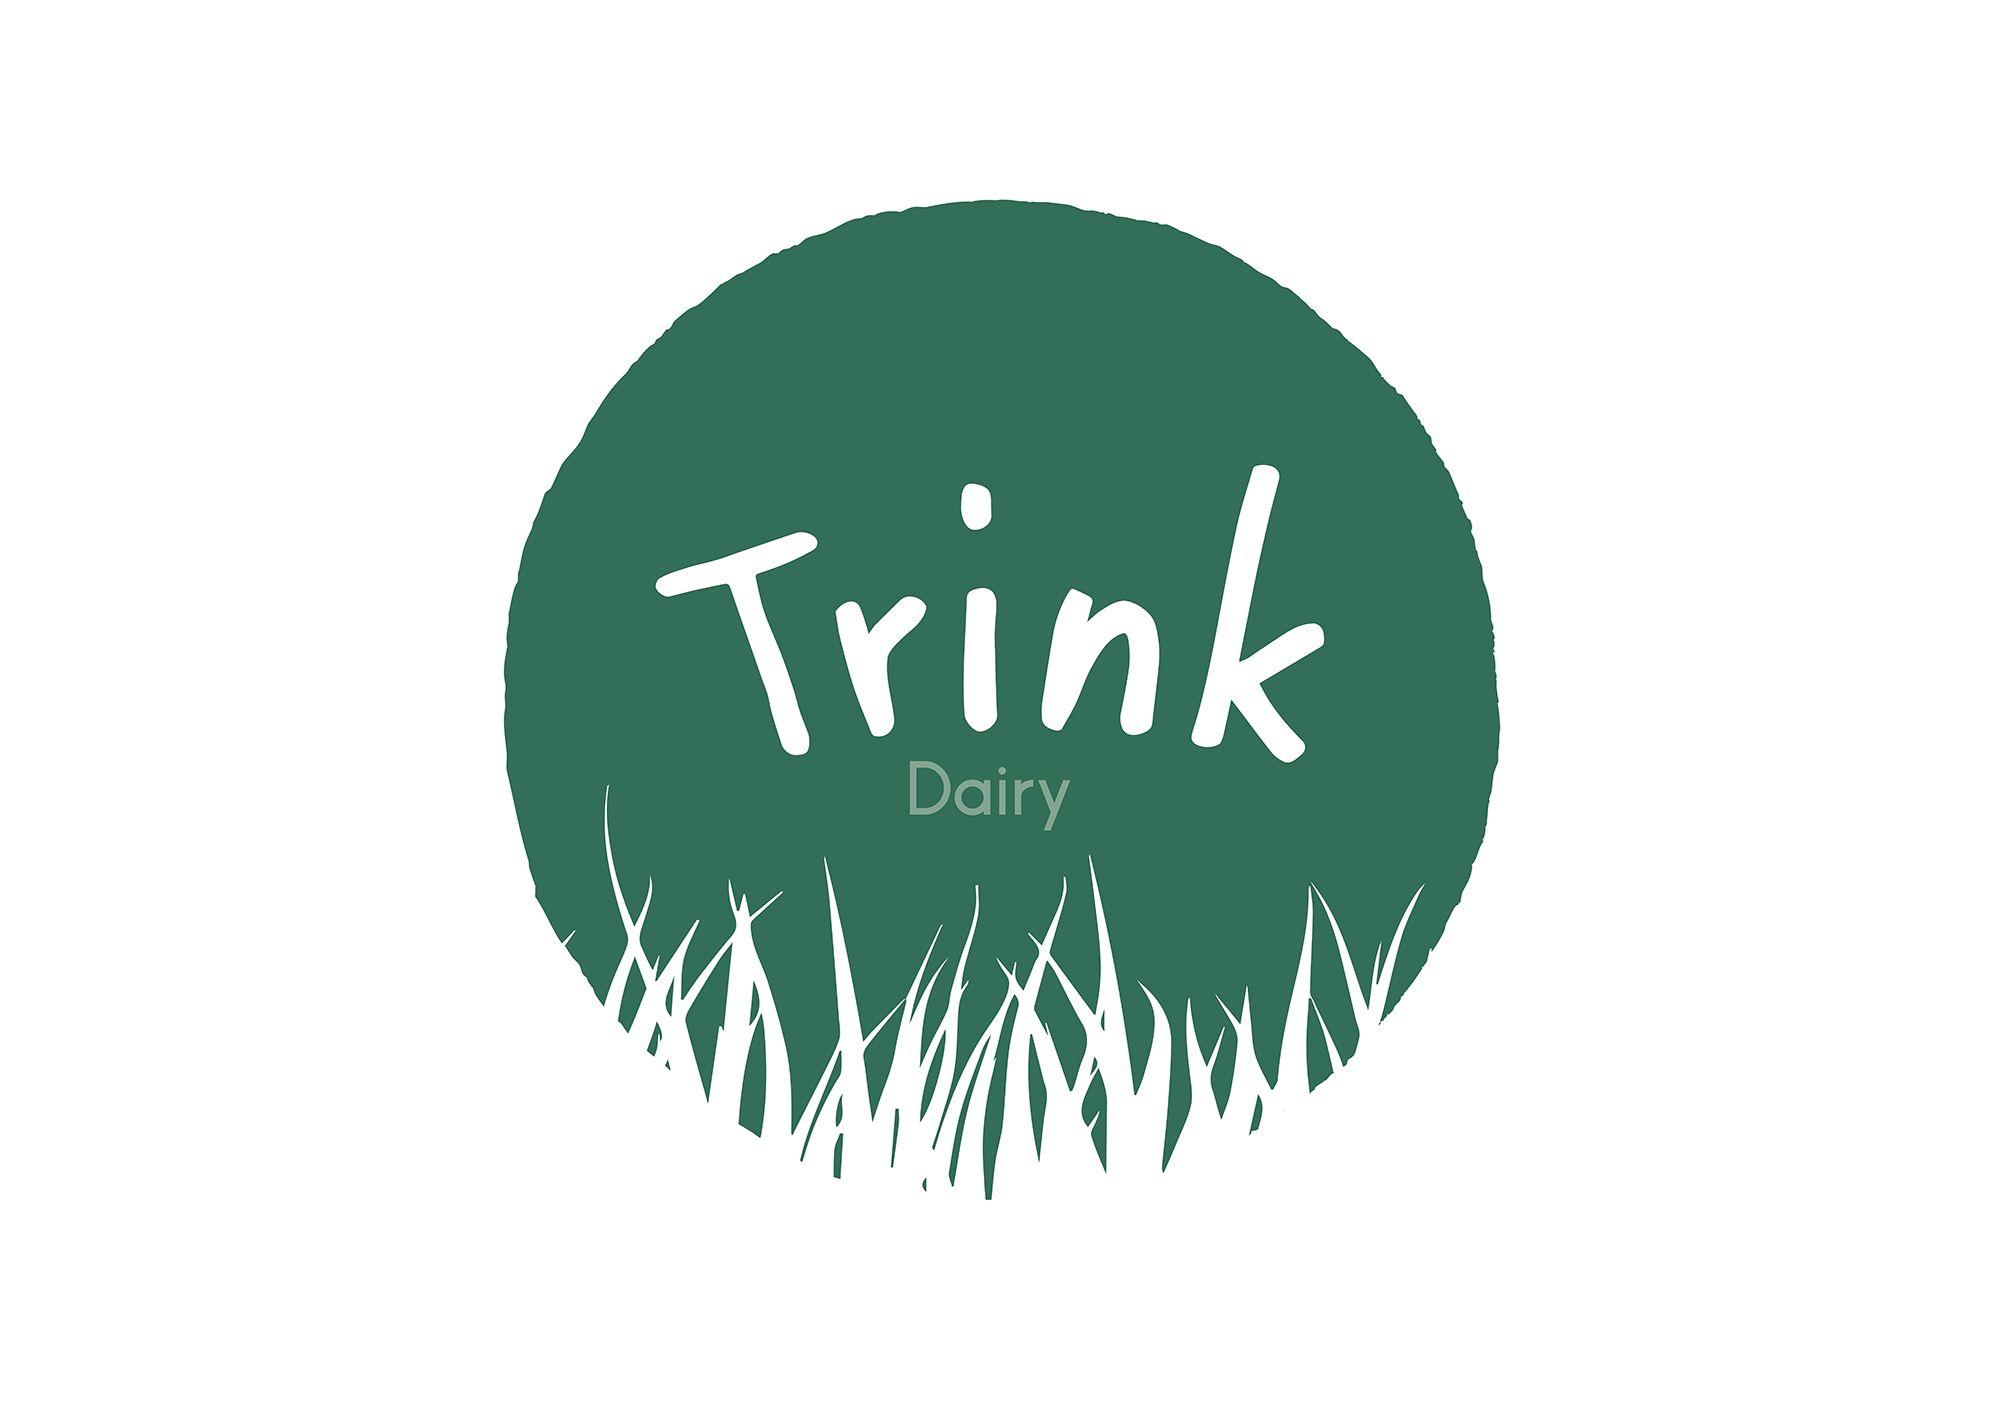 With Green Circle Brand Logo - Trink-dairy-logo-green-round-grass-branding-meor-studio-st-ives ...